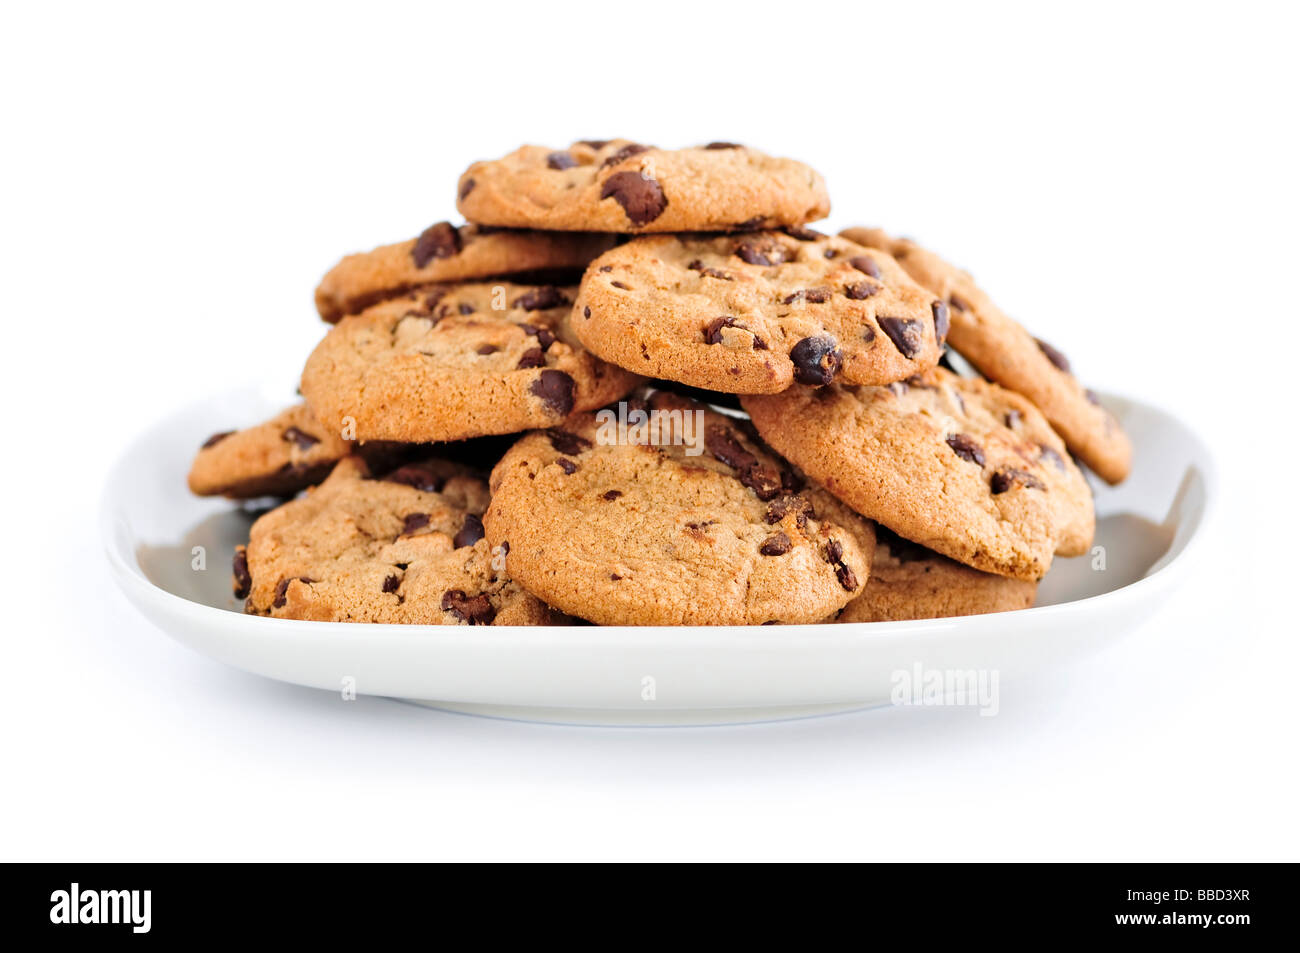 Plate of chocolate chip cookies isolated on white background Stock Photo